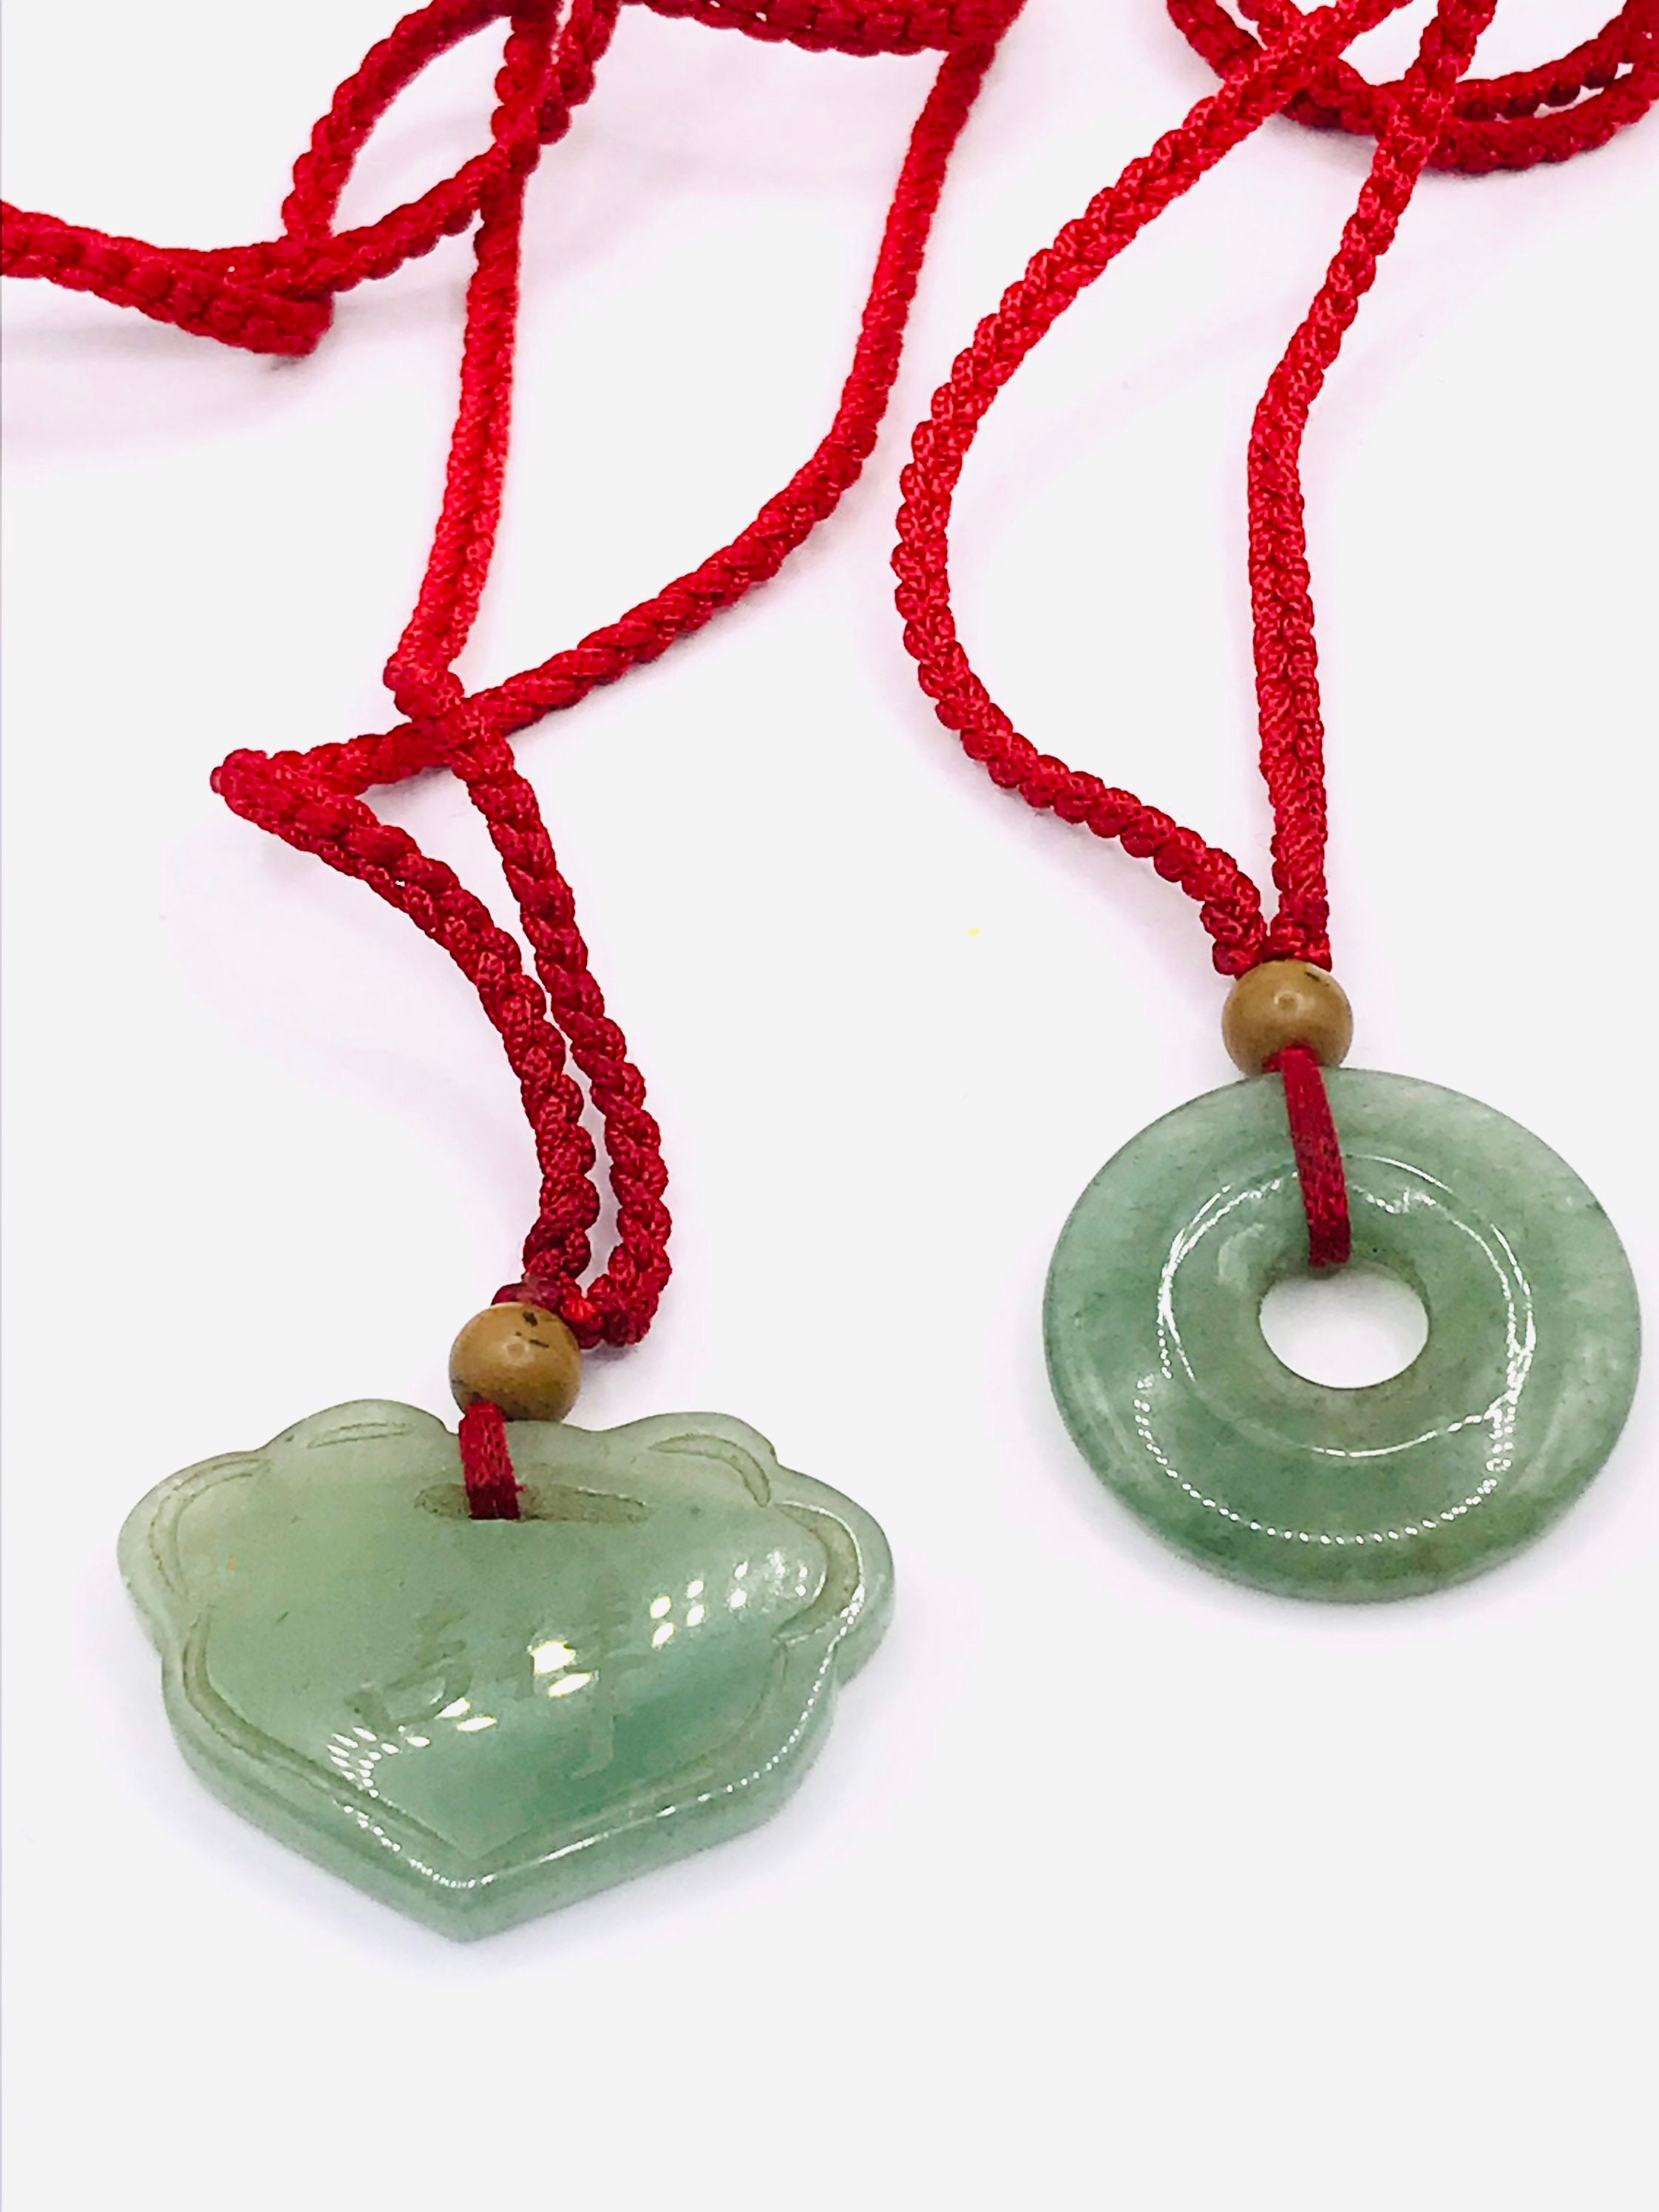 Greenstone necklace designs and 8 answers to questions customers ask |  Mountain Jade NZ